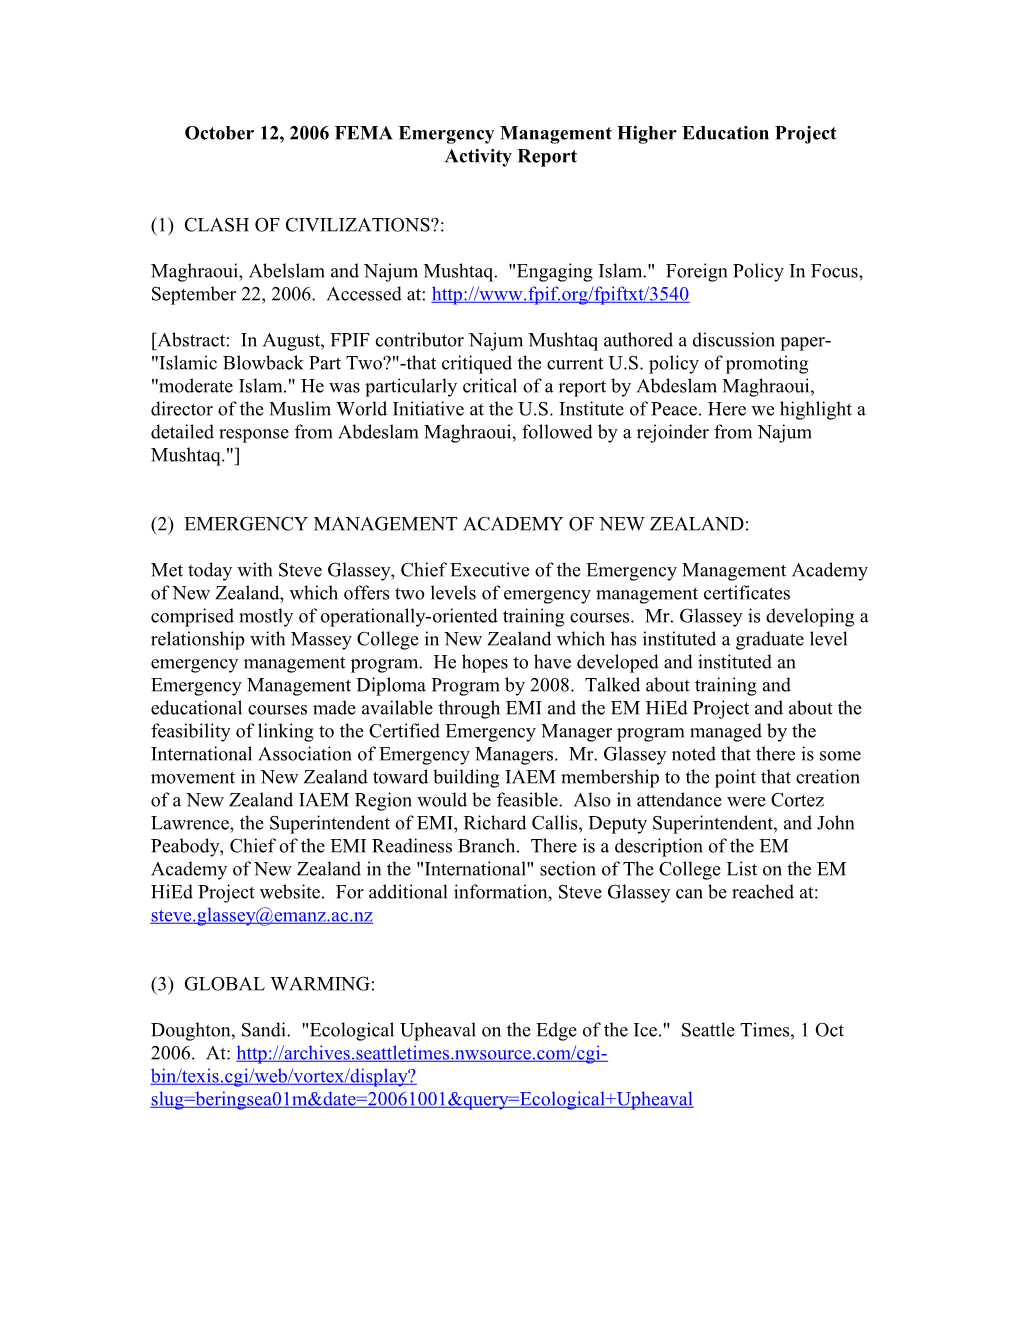 October 12, 2006 FEMA Emergency Management Higher Education Project Activity Report